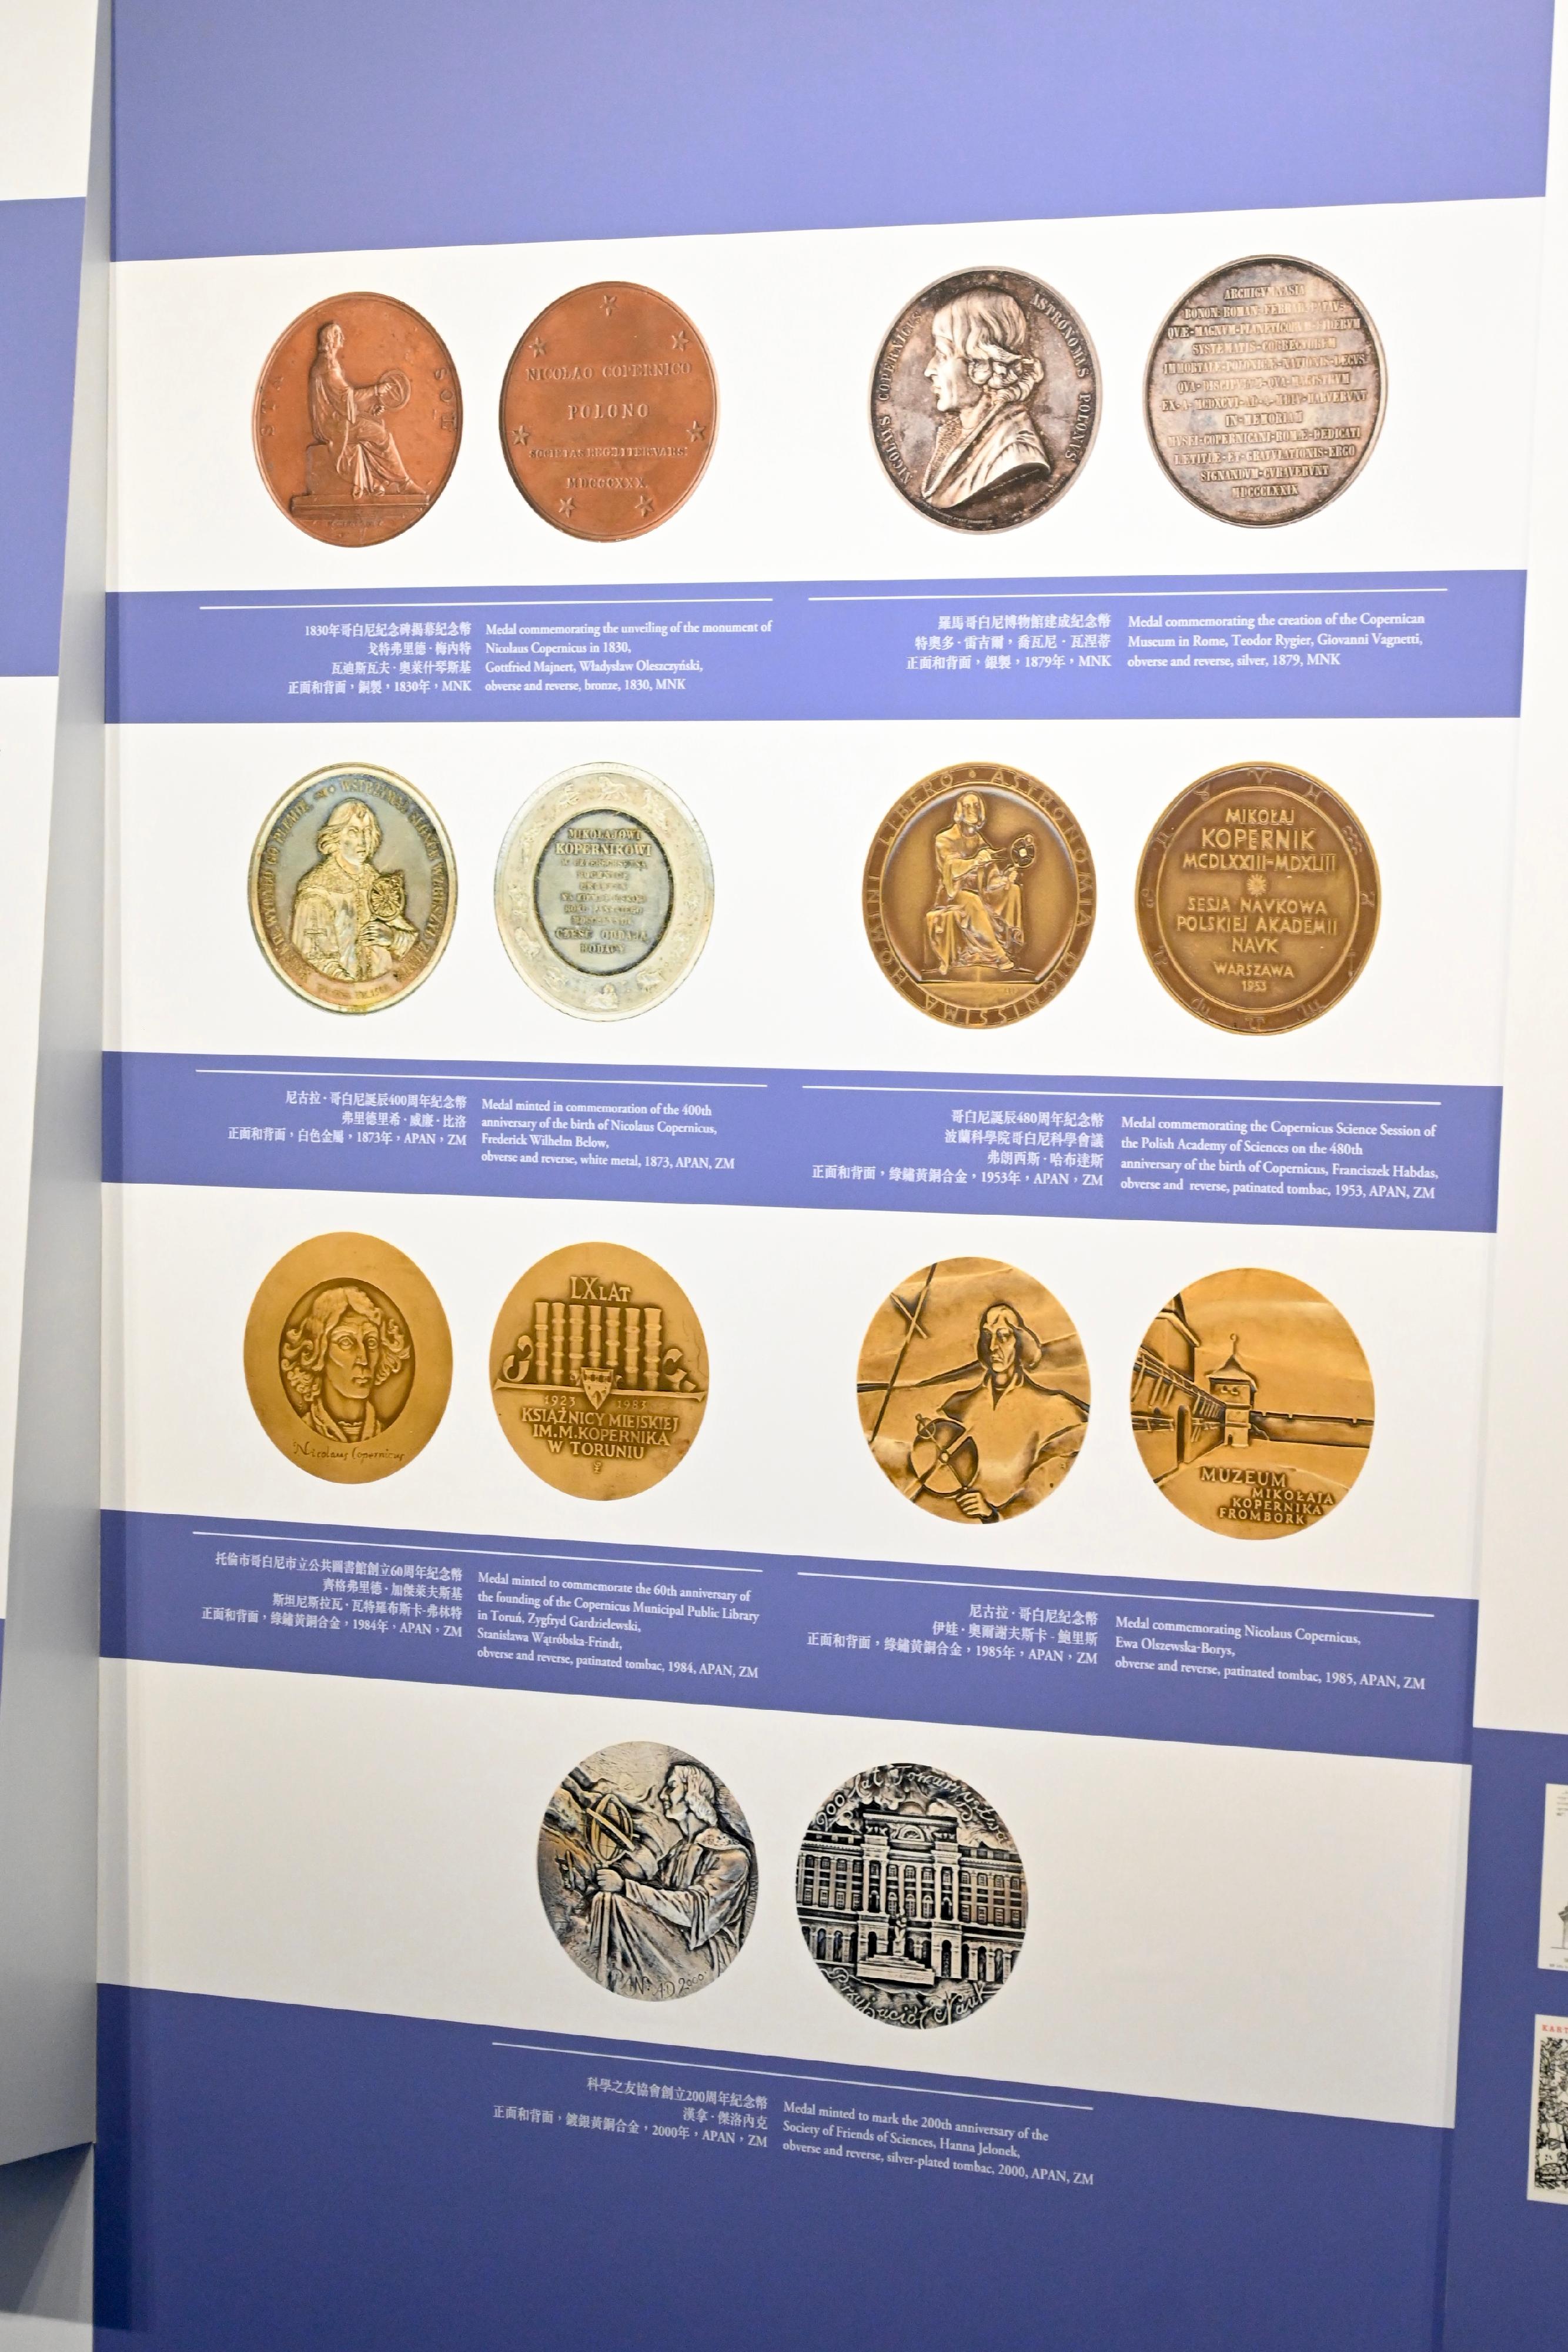 This year is the 550th anniversary of the birth of the renowned Polish astronomer Nicolaus Copernicus. The Hong Kong Space Museum will launch a special exhibition "Nicolaus Copernicus: Life and Work" starting tomorrow (June 21). Photo shows medals commemorating Nicolaus Copernicus at different times. 